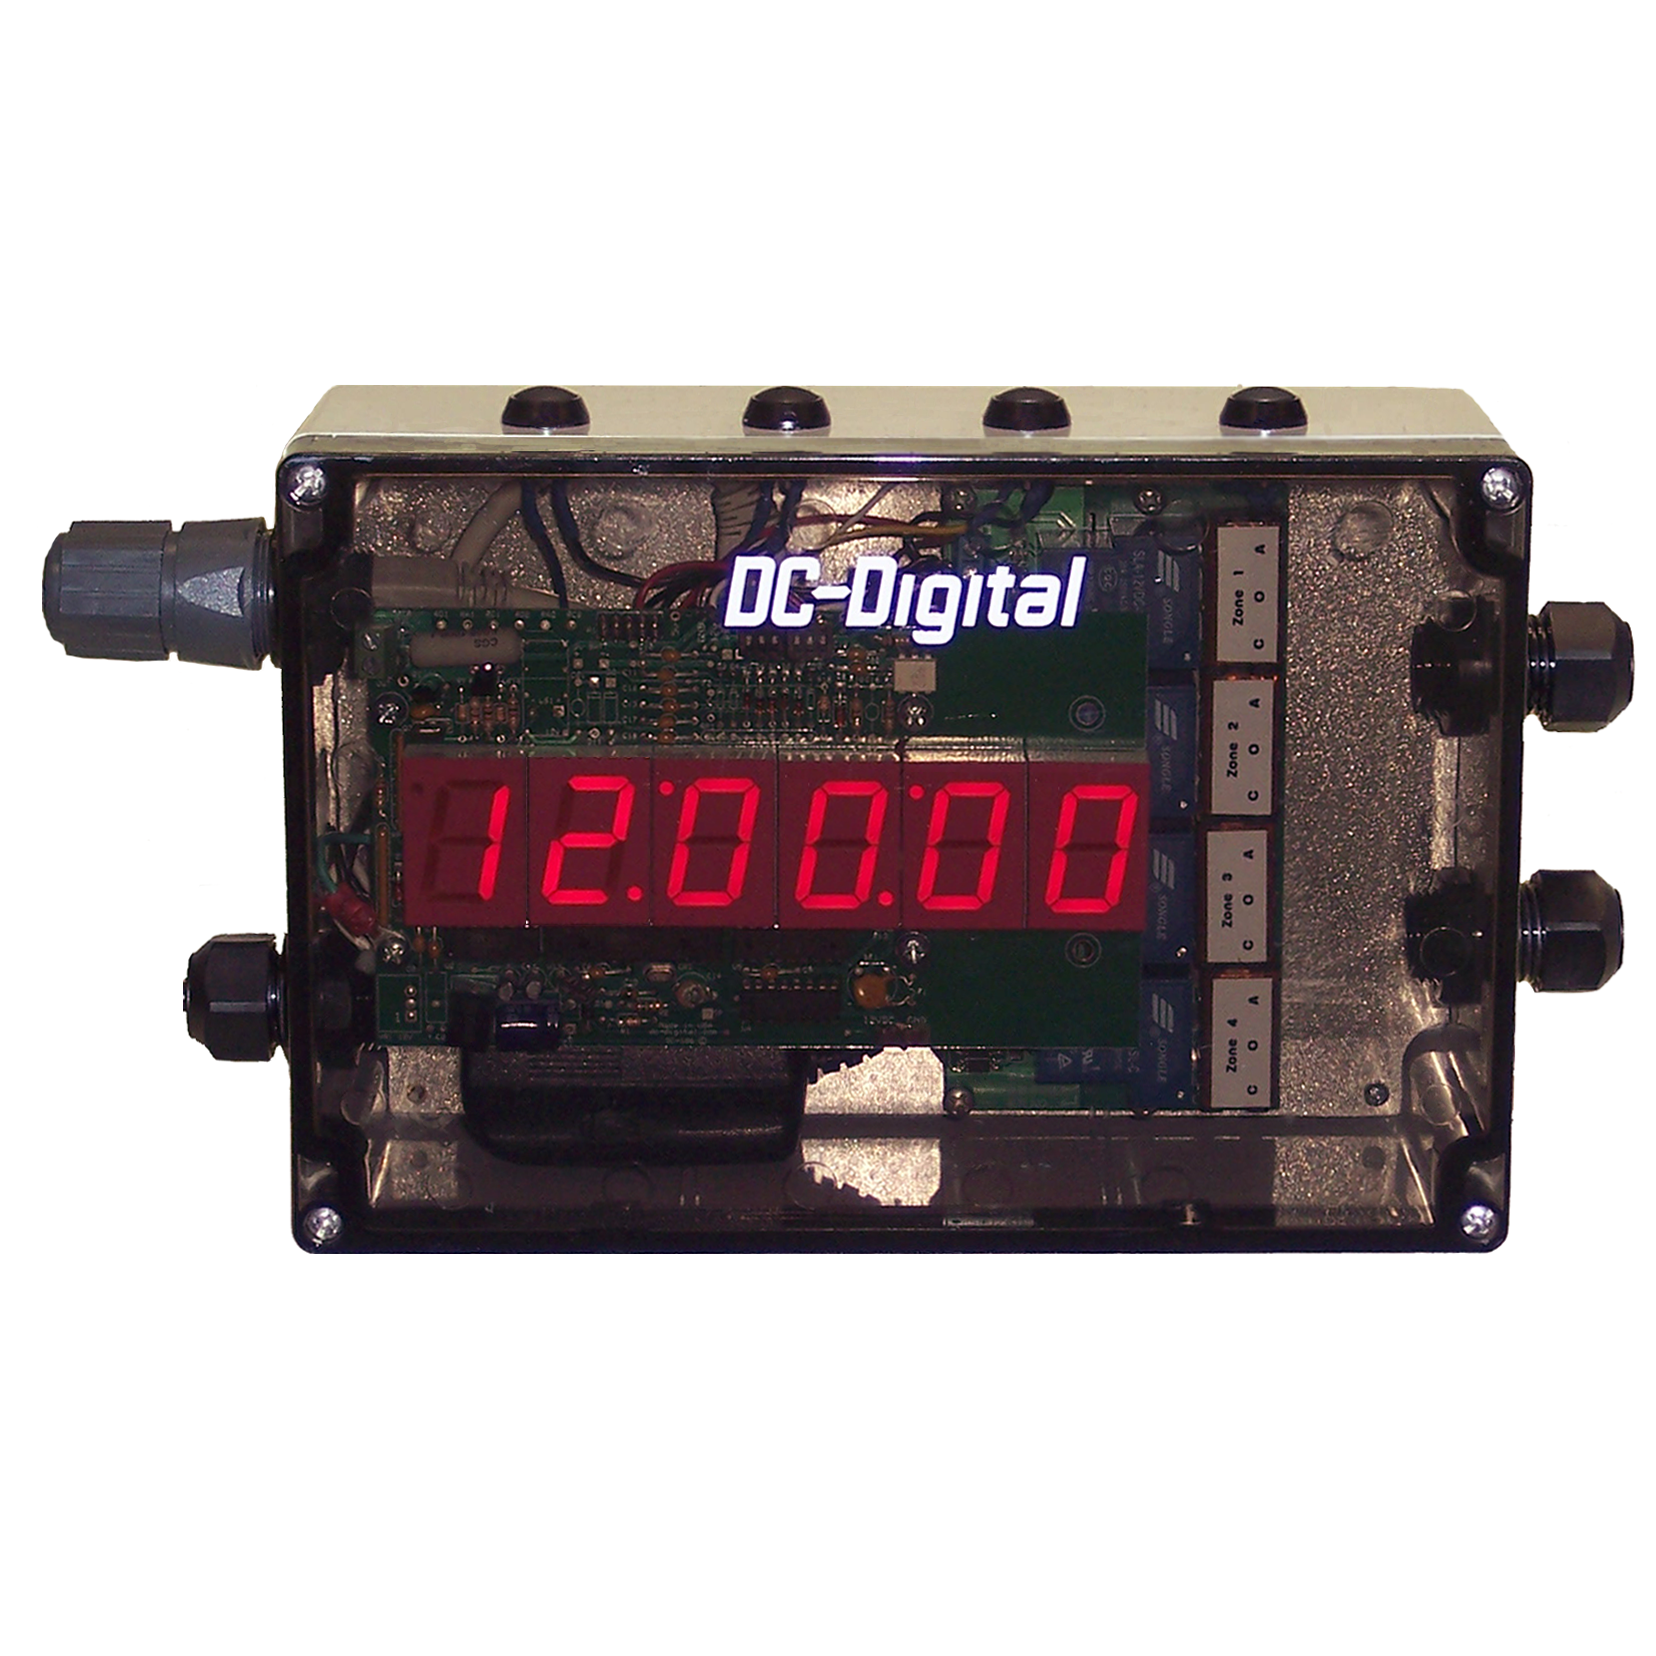 (DC-106N-RM-4) EZ-Time Synchronized and Controlled, Network to Wired Time of Day Clock Output (4-W) and 4-Zone High Power Relay Outputs with IP-66 Enclosure